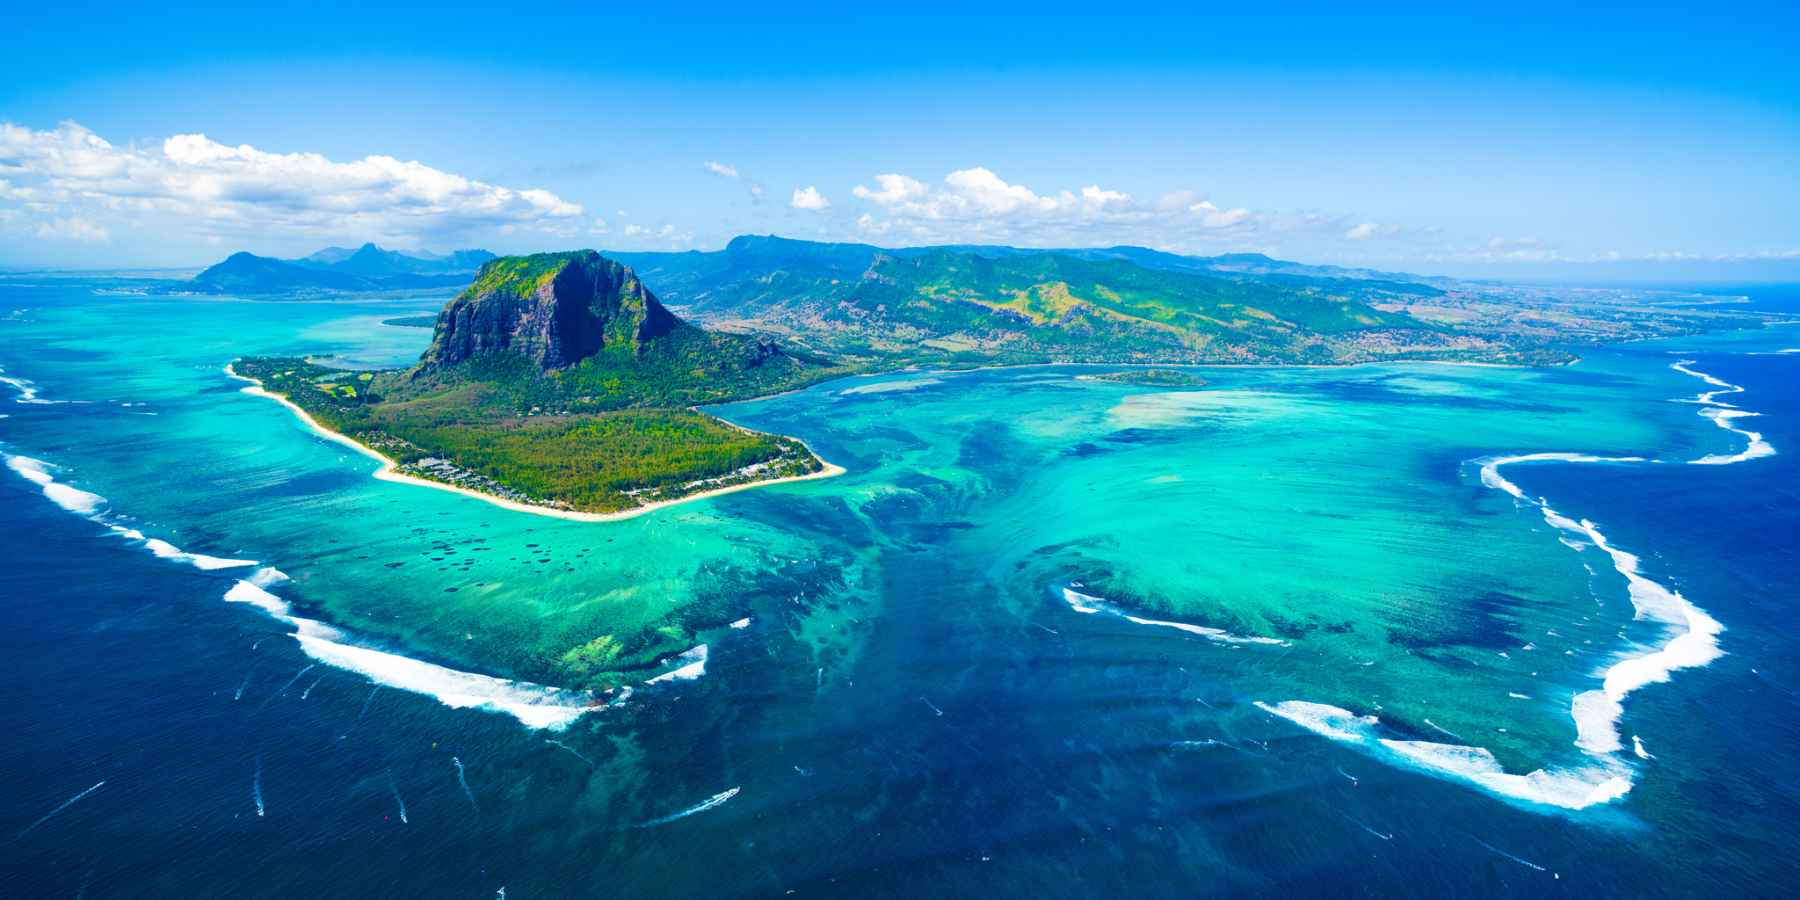 The remarkable scenery of Mauritius, an island of blues and greens. Photo: Getty